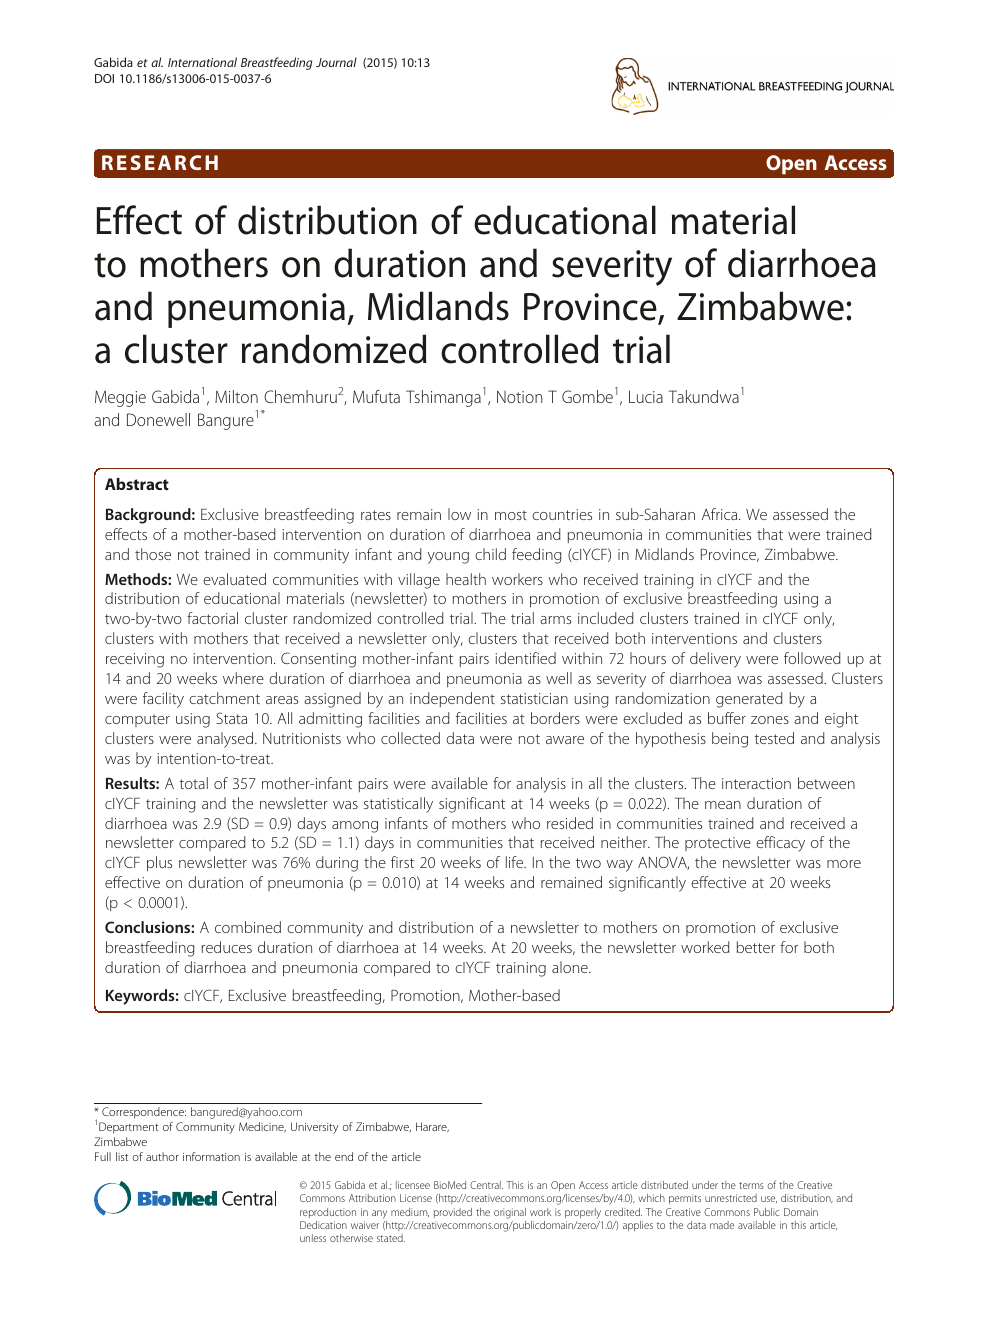 Effect of distribution of educational material to mothers on duration and severity of diarrhoea and pneumonia, Midlands Province, Zimbabwe a cluster randomized controlled trial